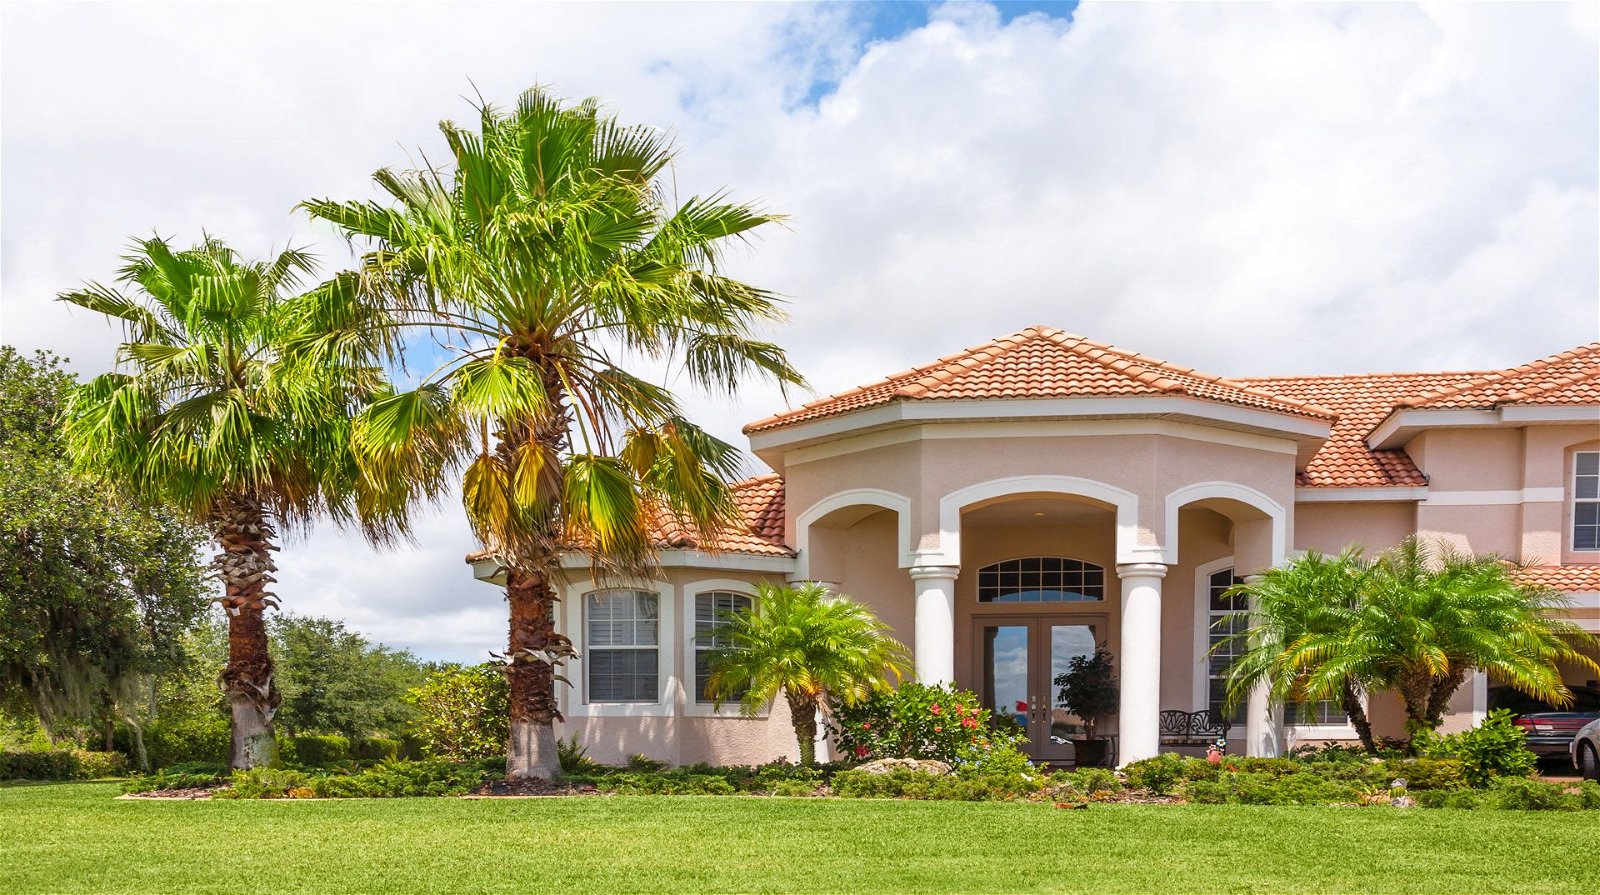 fort myers mortgage, fort myers mortgage rates, fort myers mortgage broker, fort myers mortgage lender, mortgage fort myers, fort myers mortgage condo financing, fort myers mortgage condo mortgages, fort myers condotel financing, fort myers condotel mortgage, fort myers condotel mortgage rates, fort myers mortgage calculator,